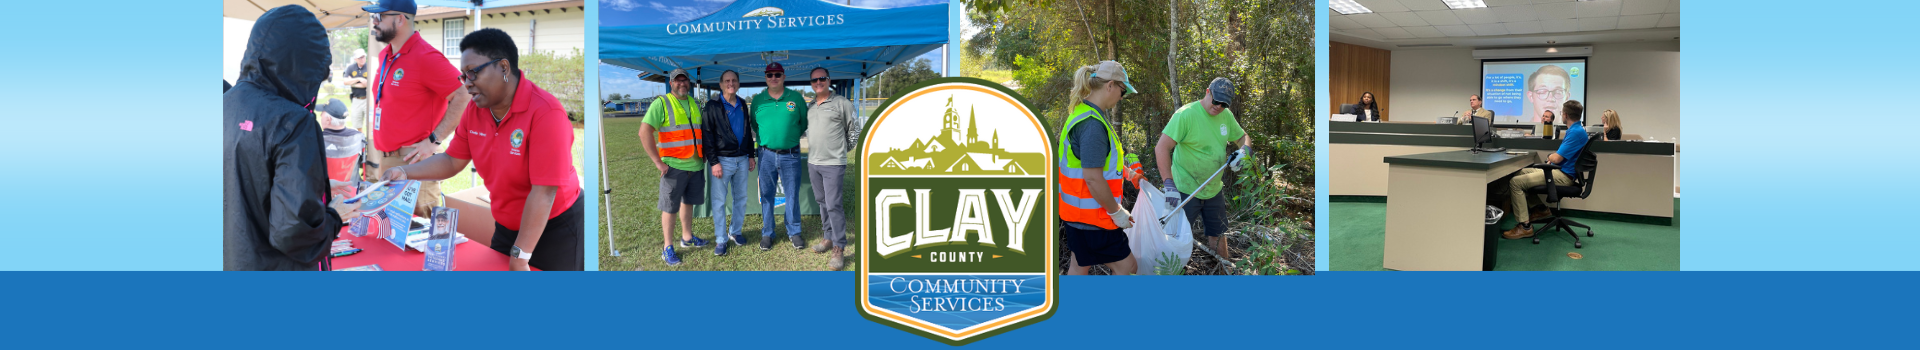 Community Services Banner